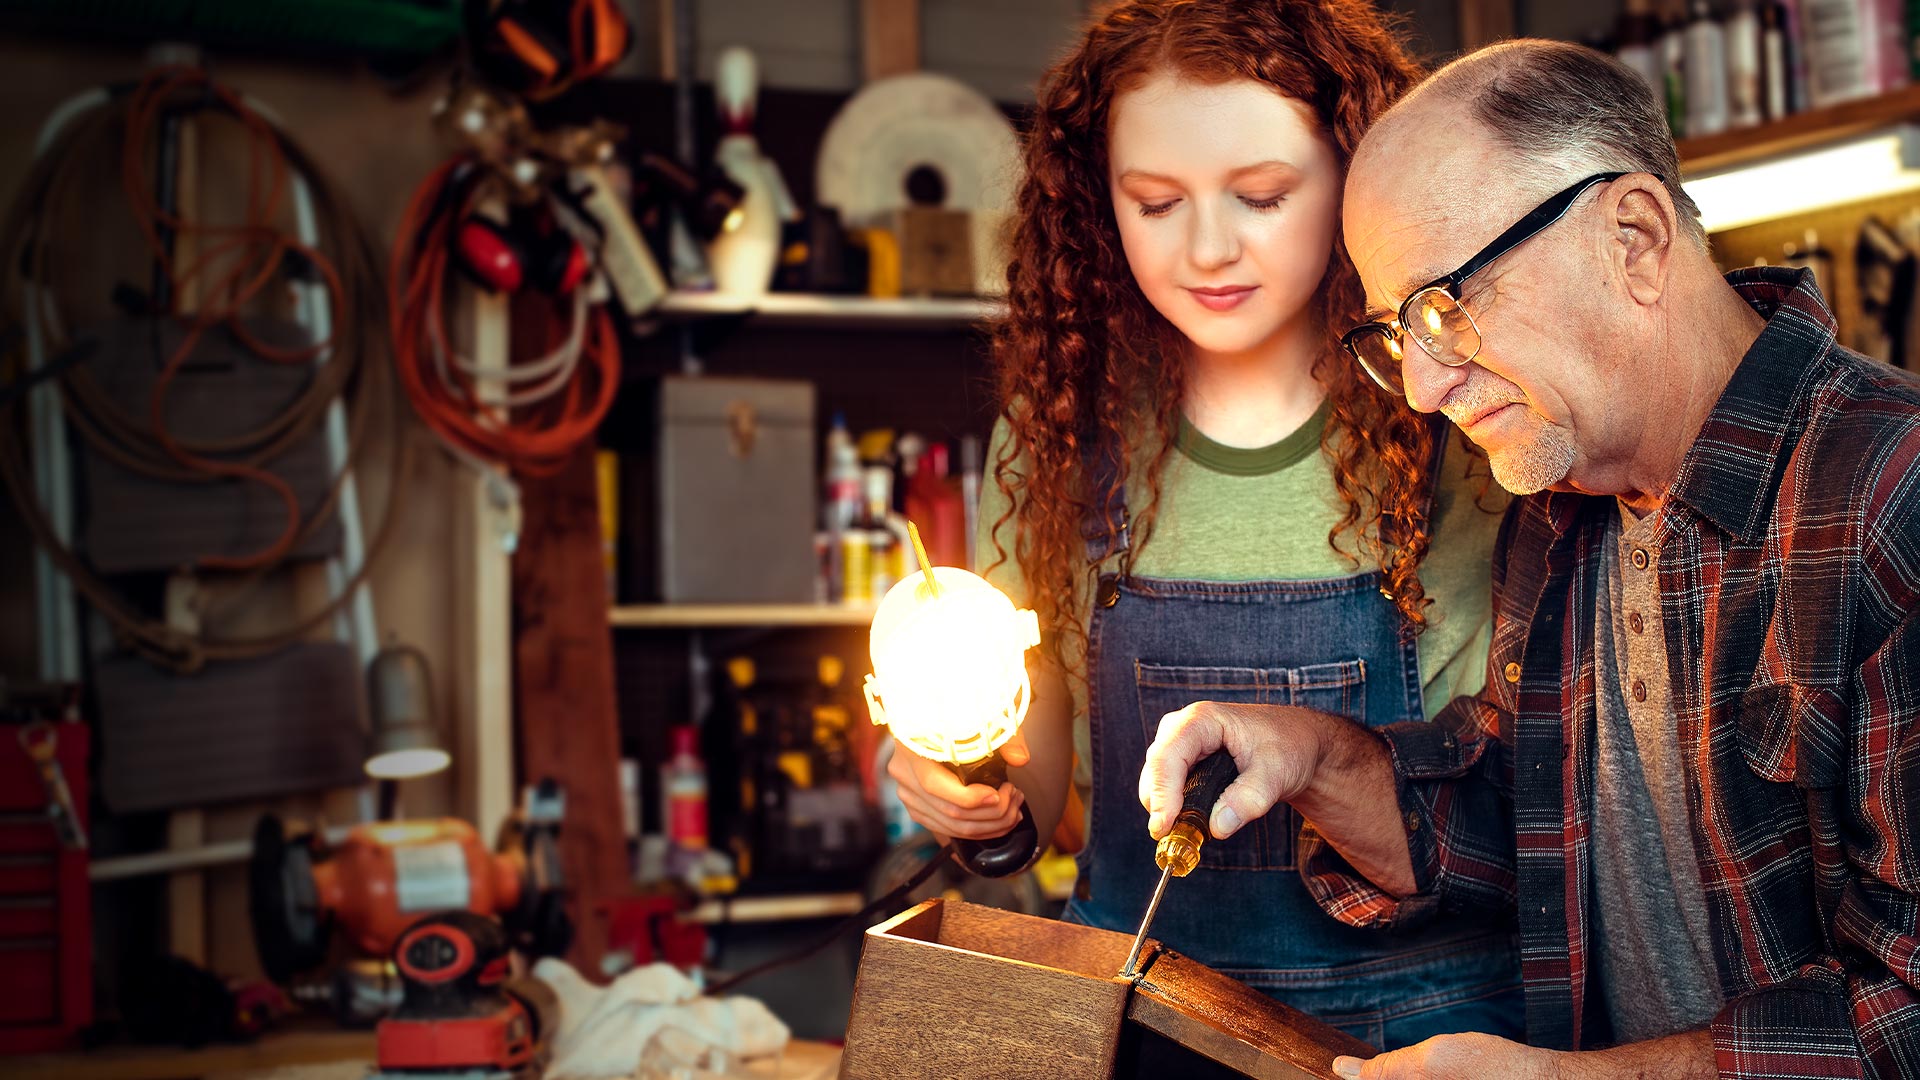 Girl holding a light over a box that a man is working on in a workshop